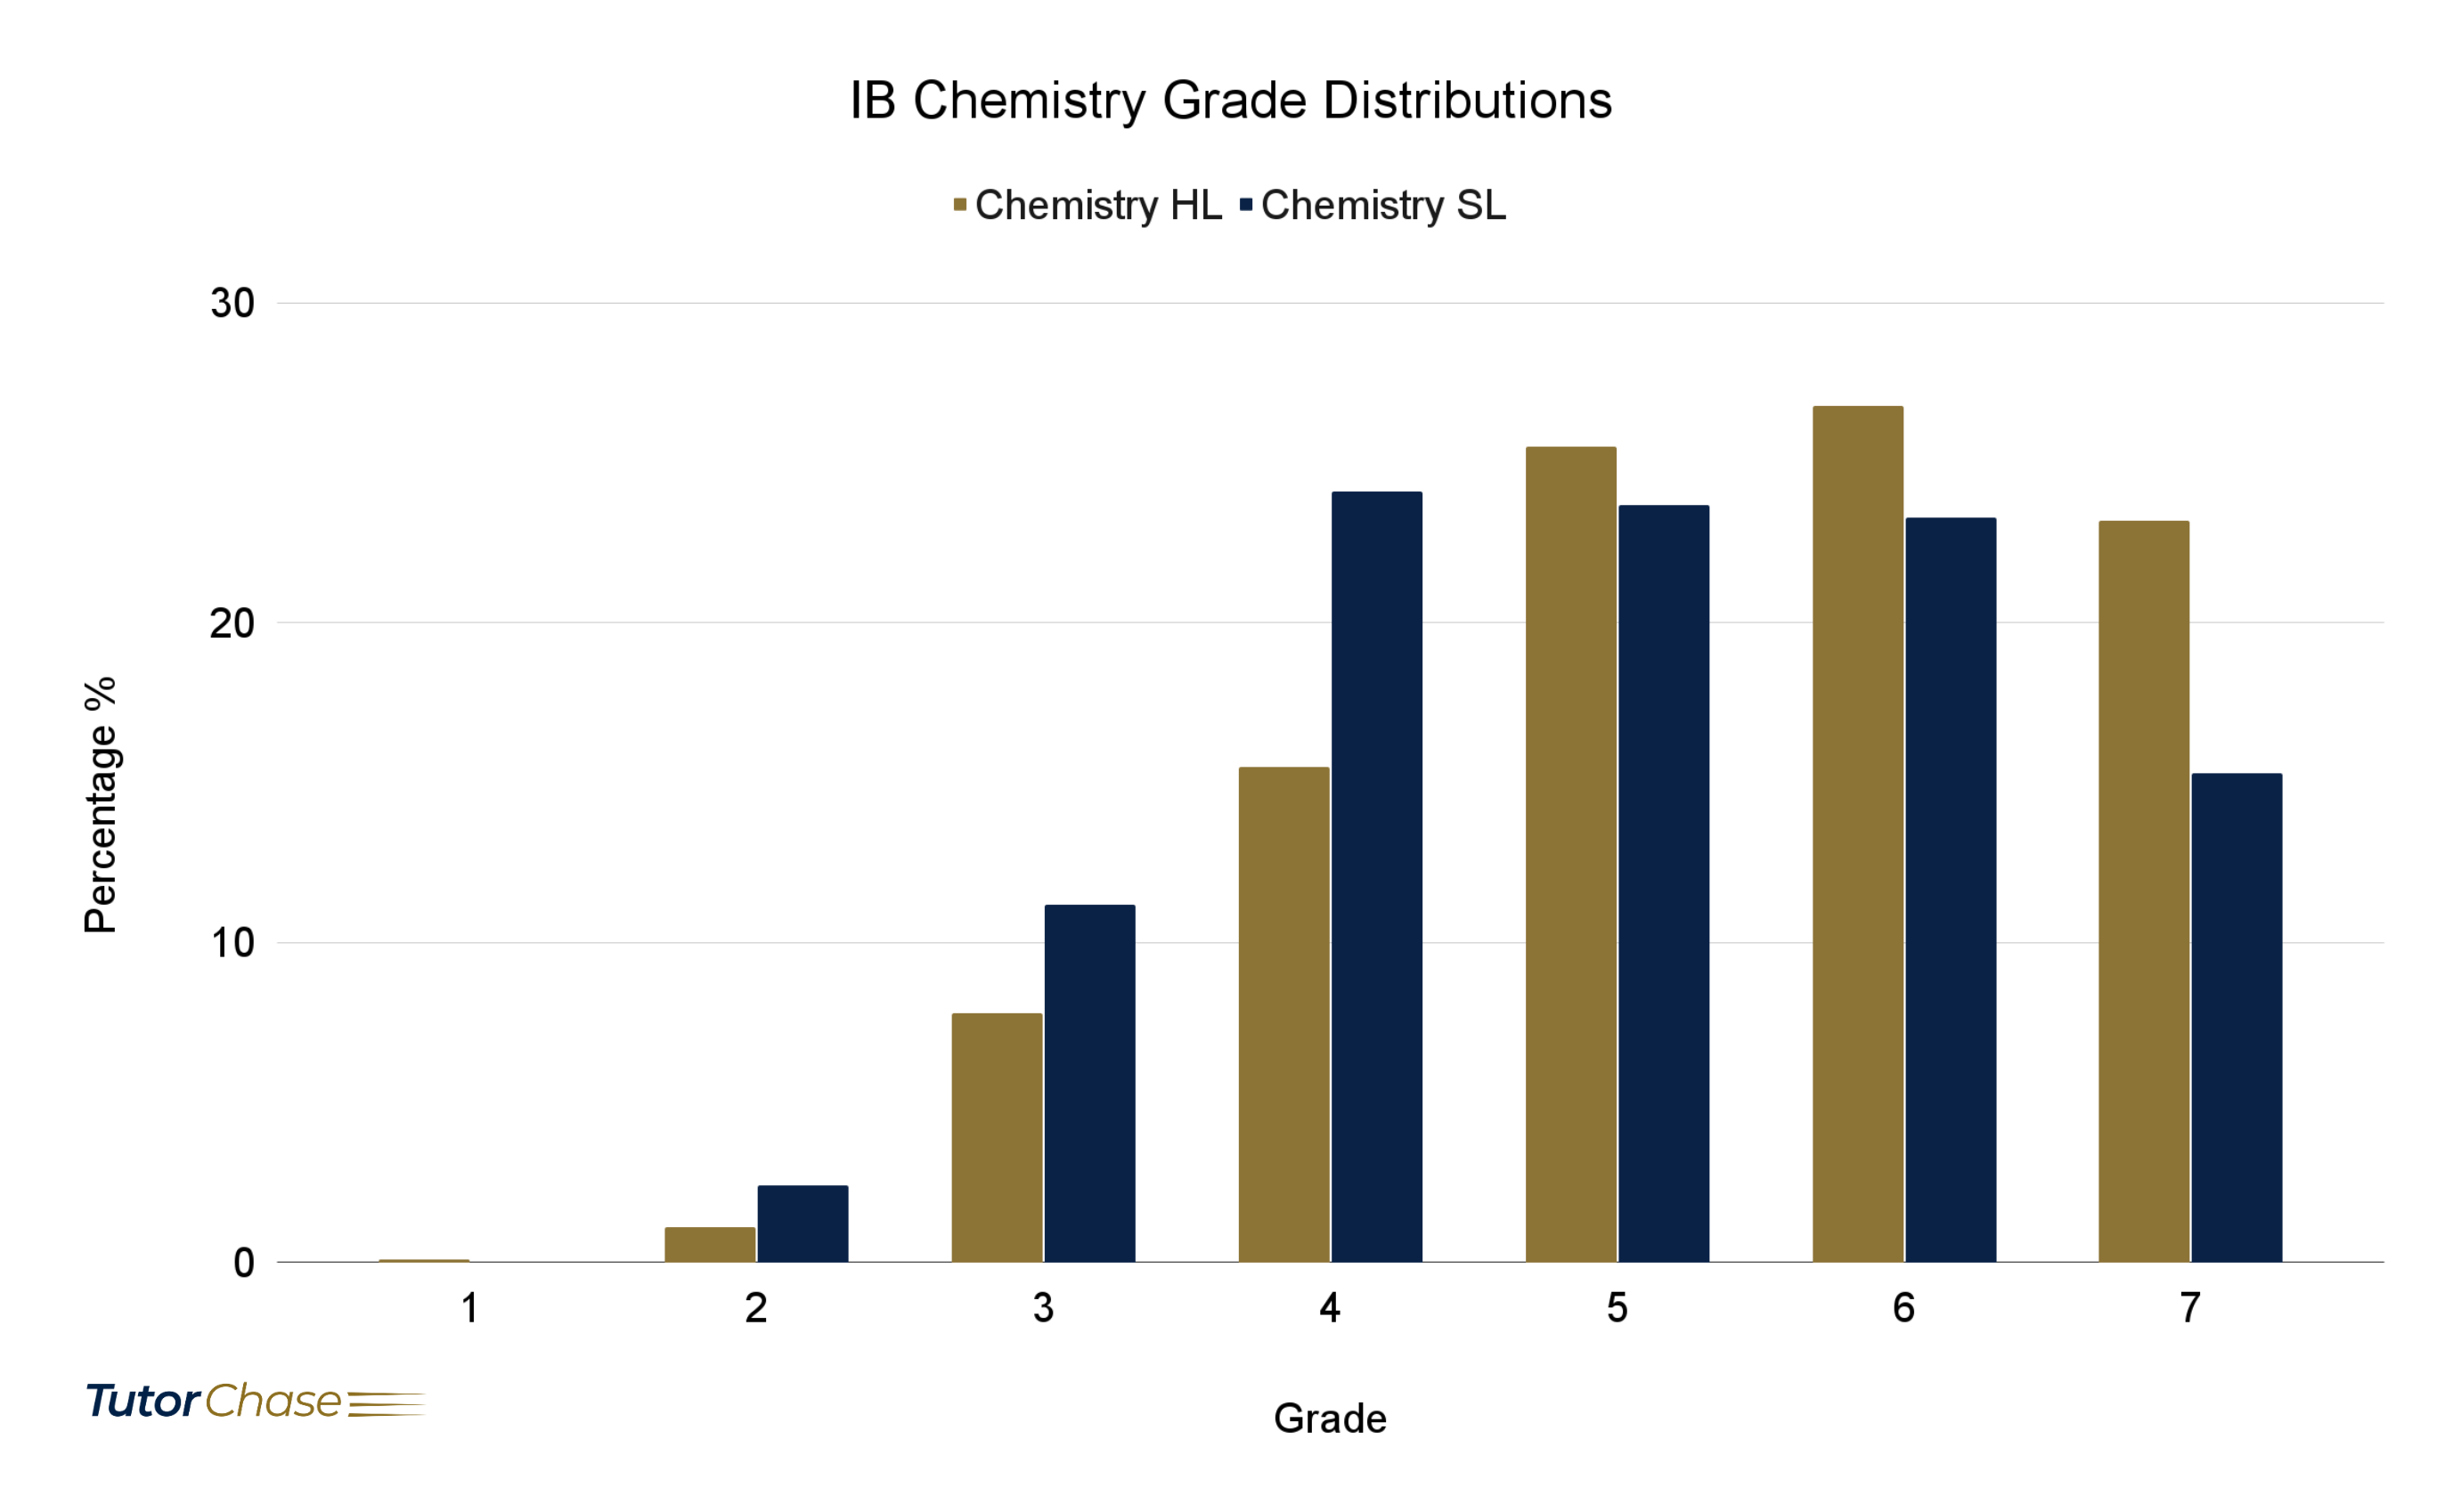 IB Chemistry SL and HL grade distributions in 2021